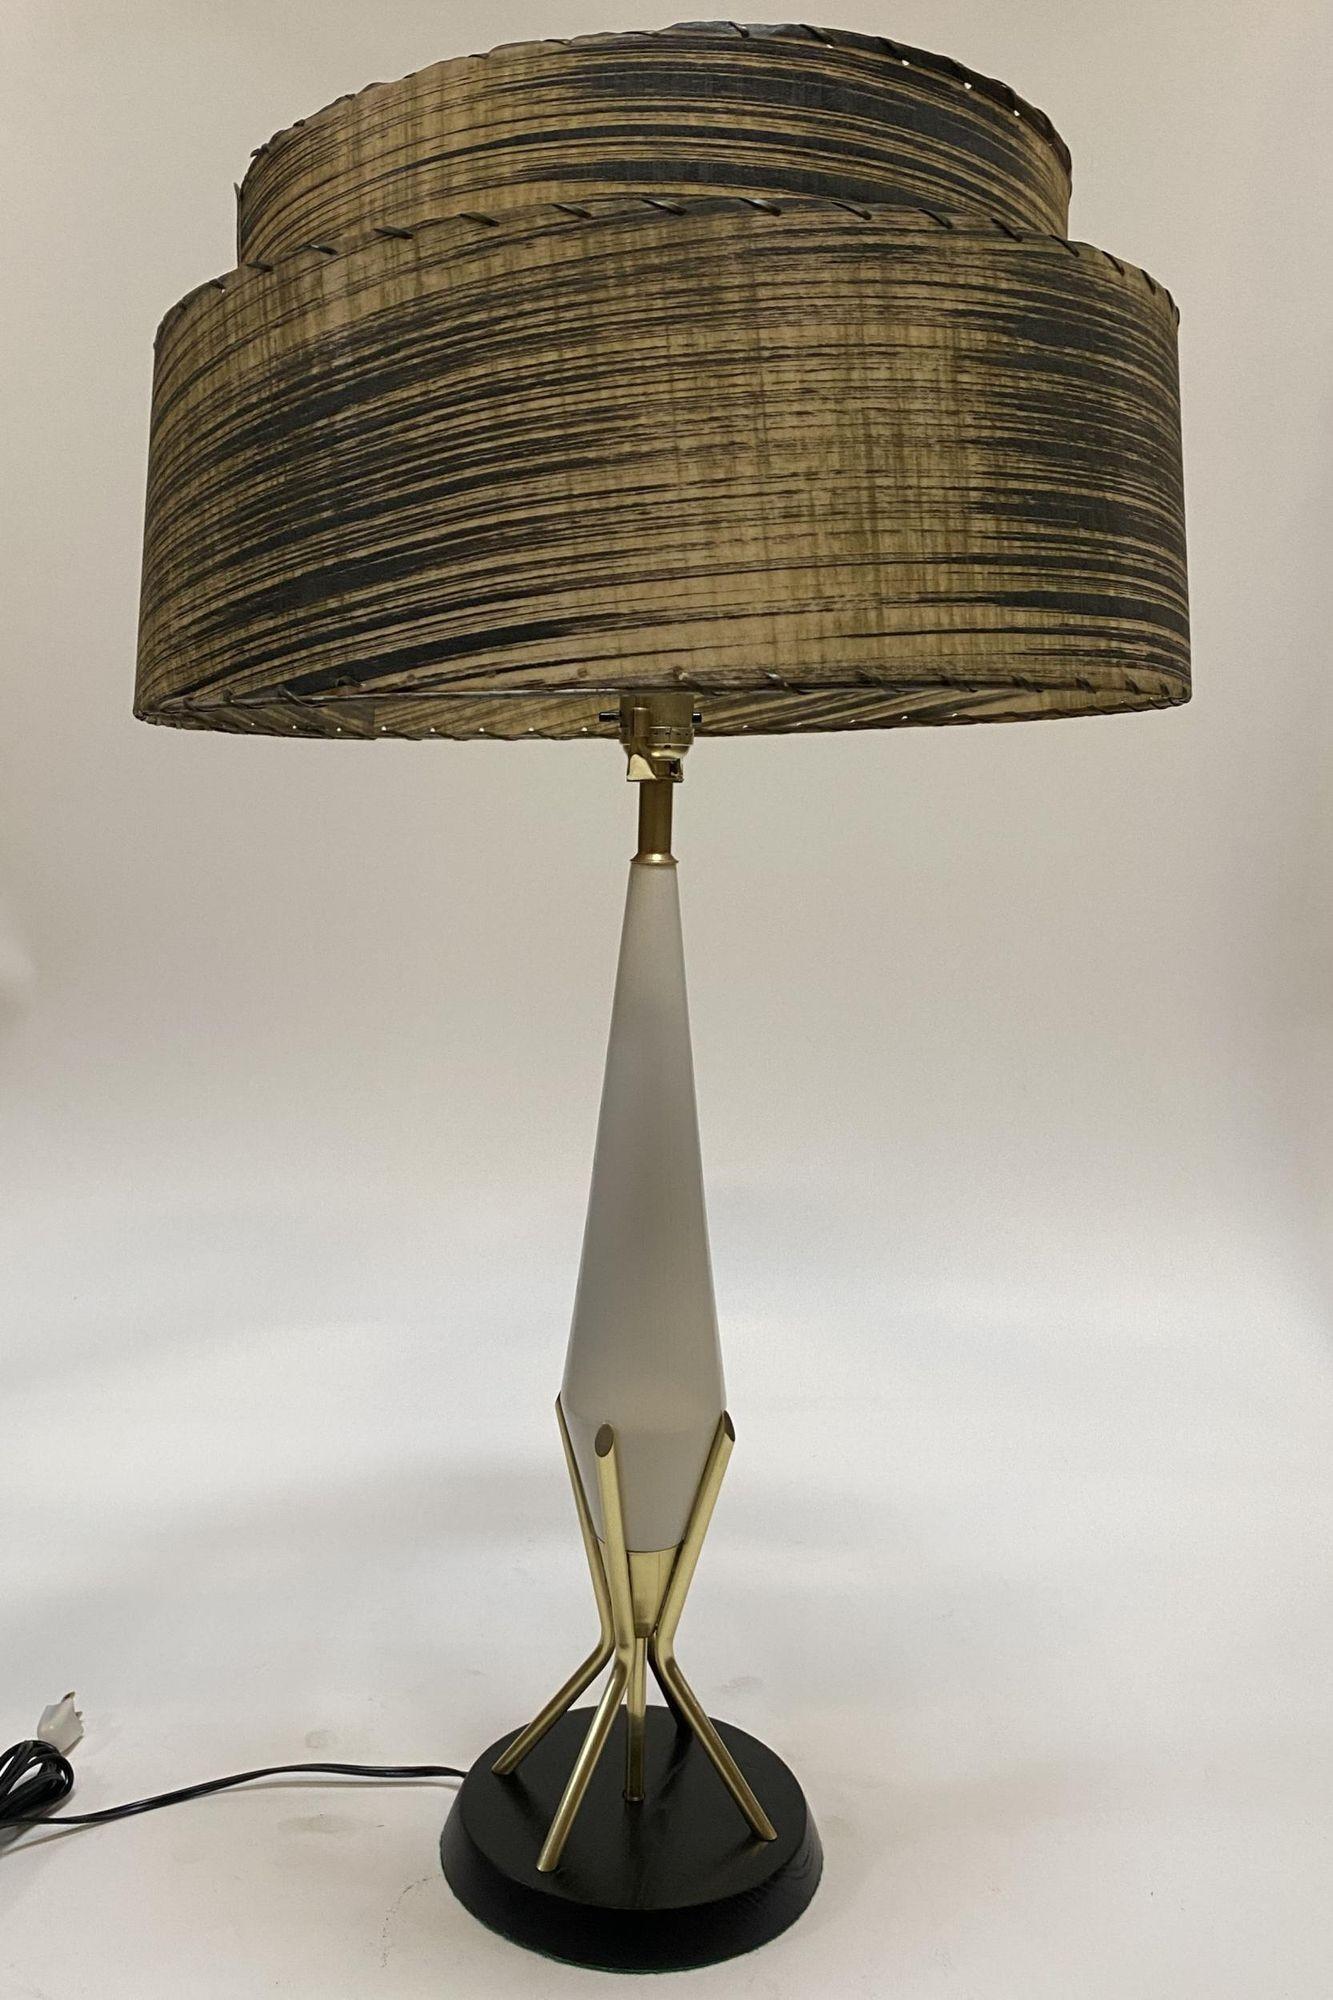 Original Mid Century Googie table lamp featuring a black base connected to 3 brass rods which support tapered lamp neck. 

Included is the whipple stitch fiberglass lamp with modernist pattern along the front. 

Lamp: 24